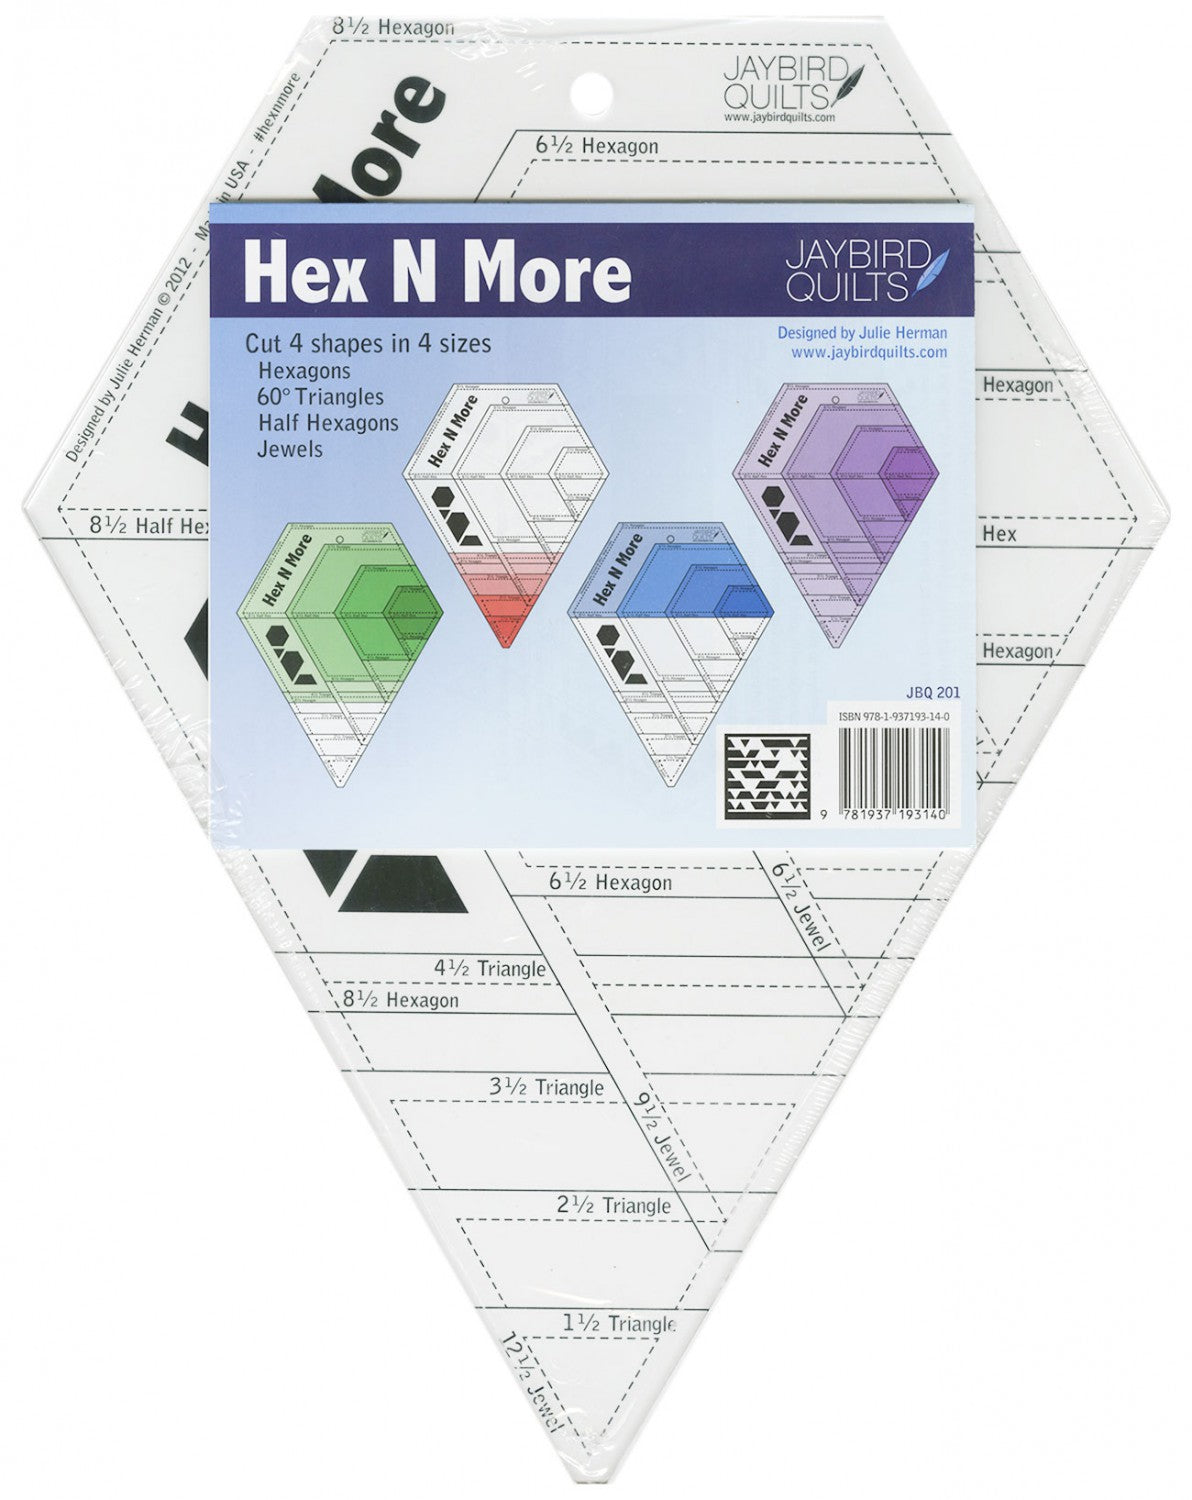 Hex N More by Jaybird Quilts